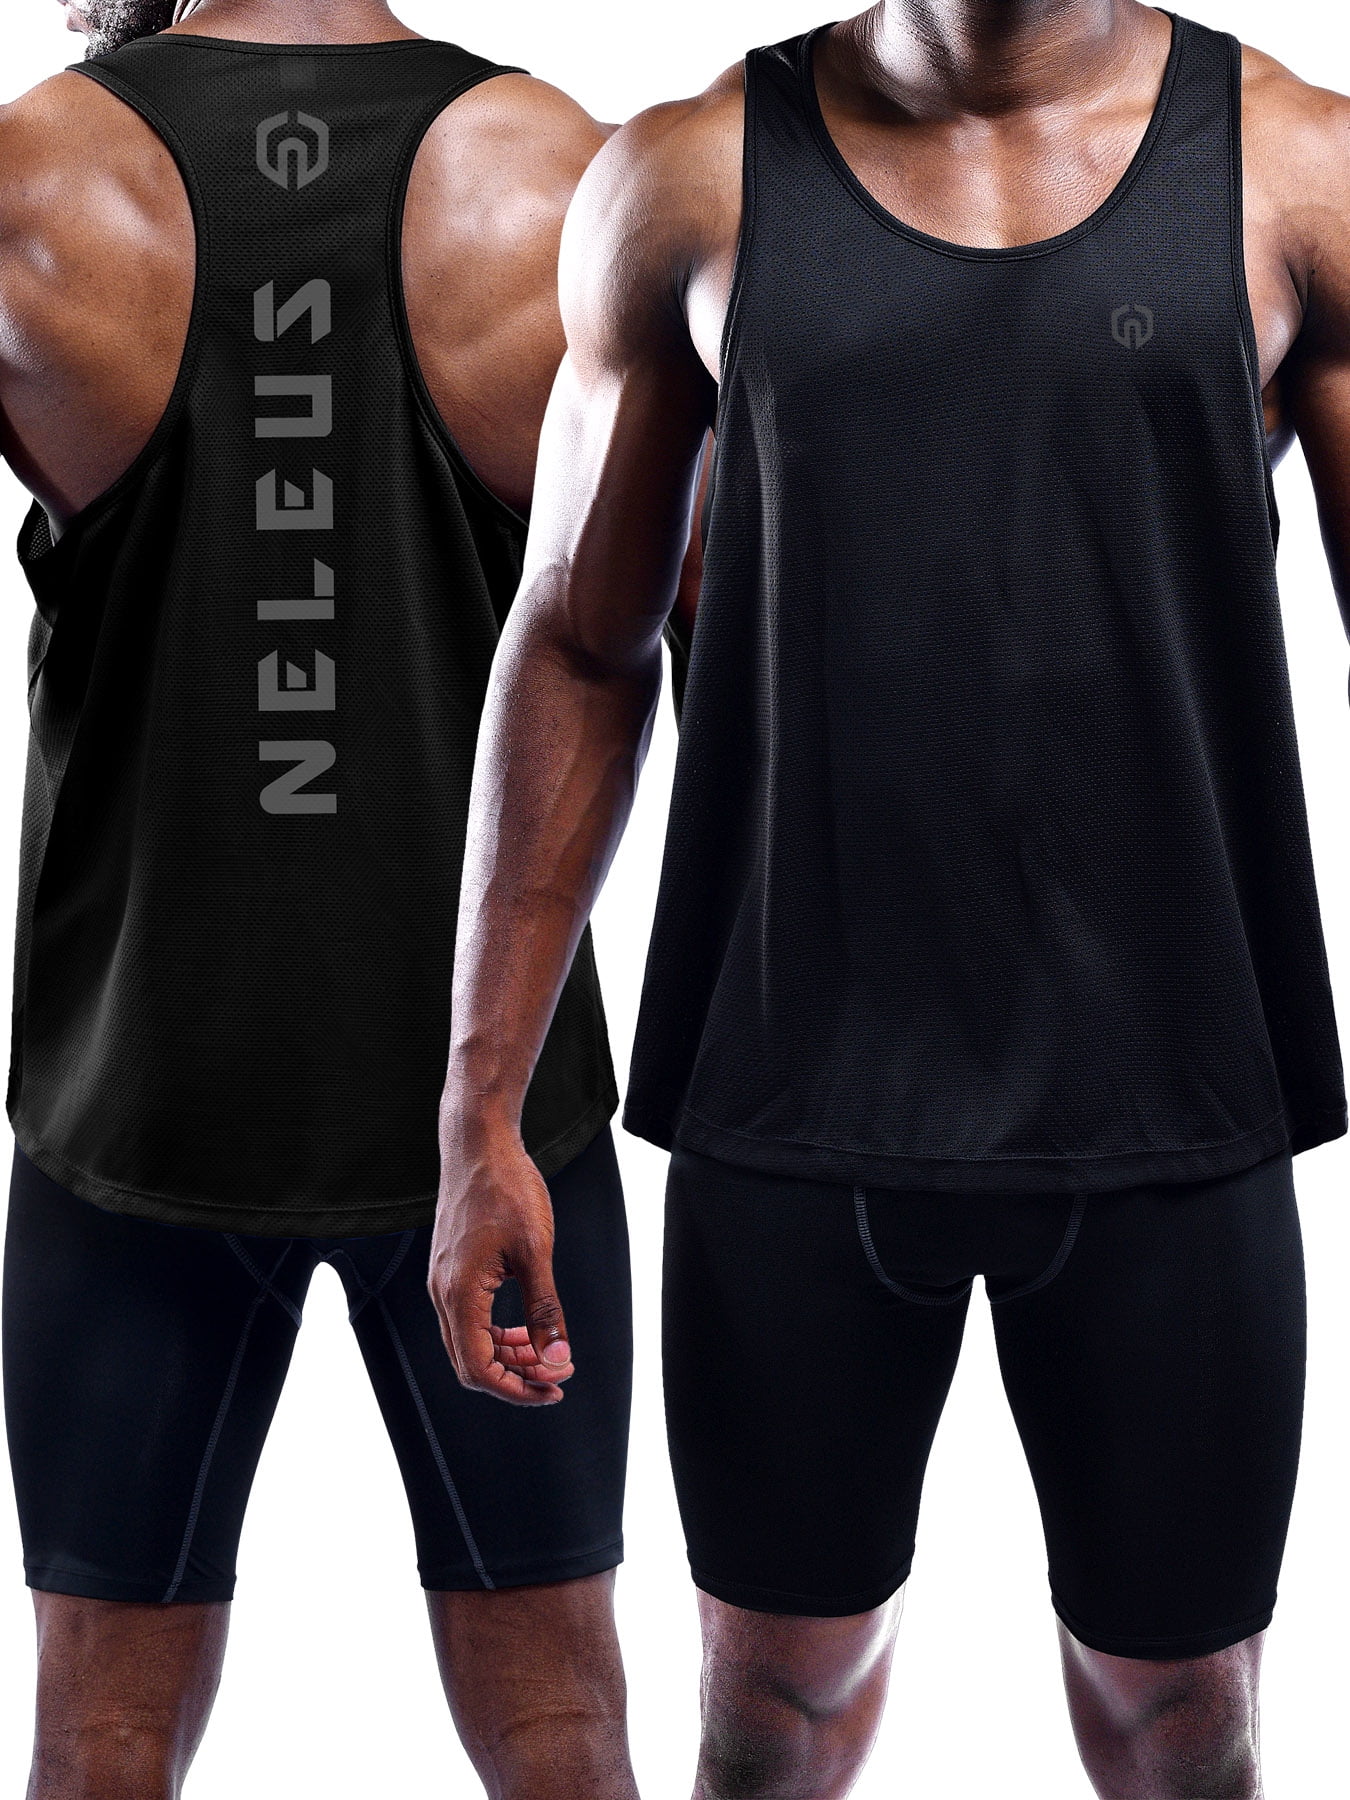  NELEUS Men's 3 Pack Workout Running Tank Top Sleeveless Gym  Athletic Shirts,5080,Black/Grey/Blue,S : Clothing, Shoes & Jewelry